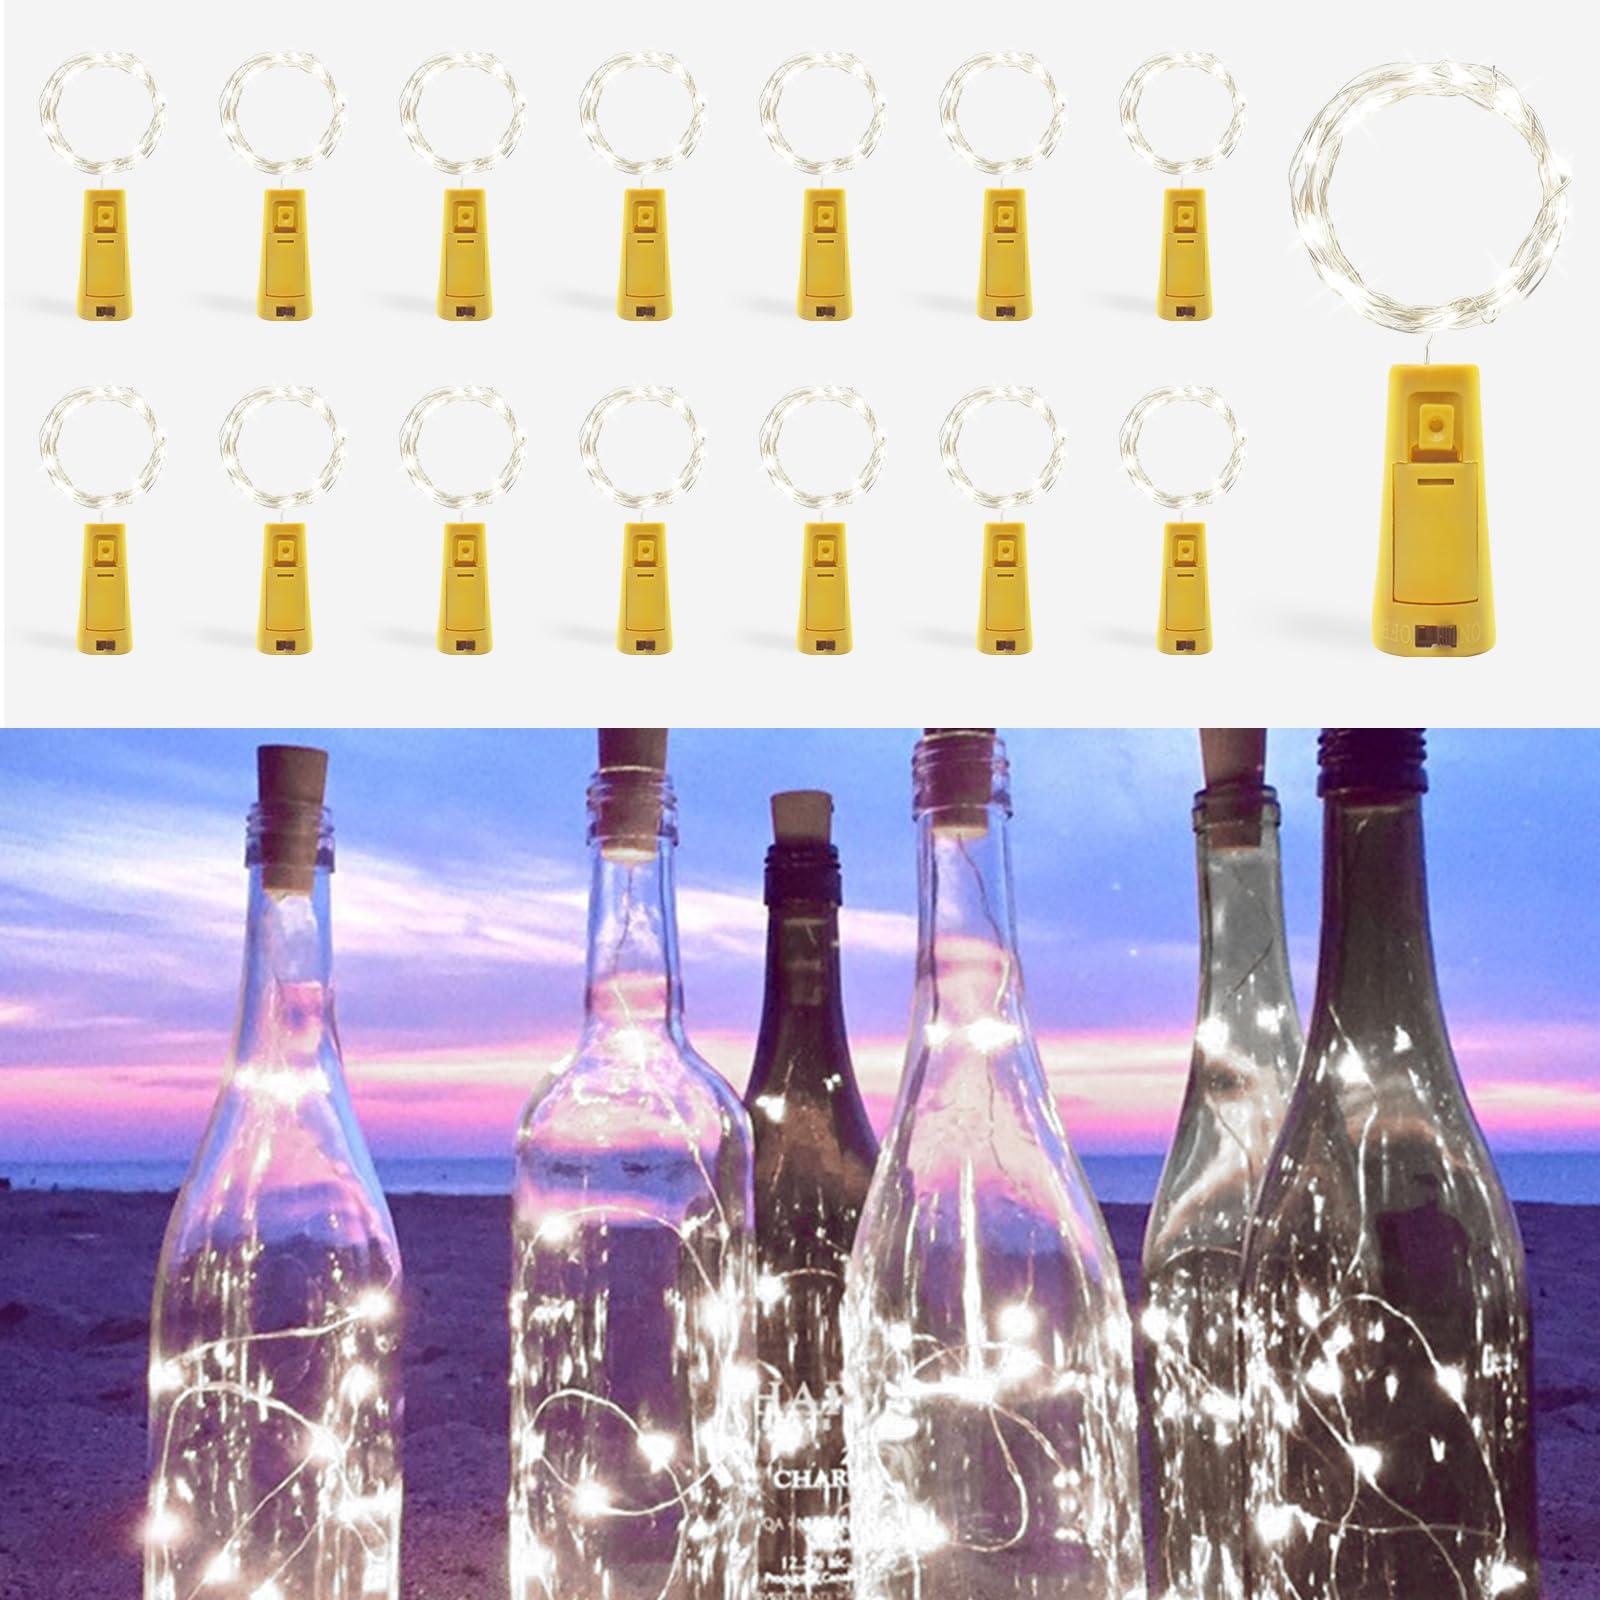 [15 Pack] BROTOU Bottle Lights, 2M 20 LED Battery Operated Fairy Cork Lights| Battery Included|, for DIY Parties of Birthday, Wedding, Halloween, Christmas, in/Outdoor Decoration (Cold White)